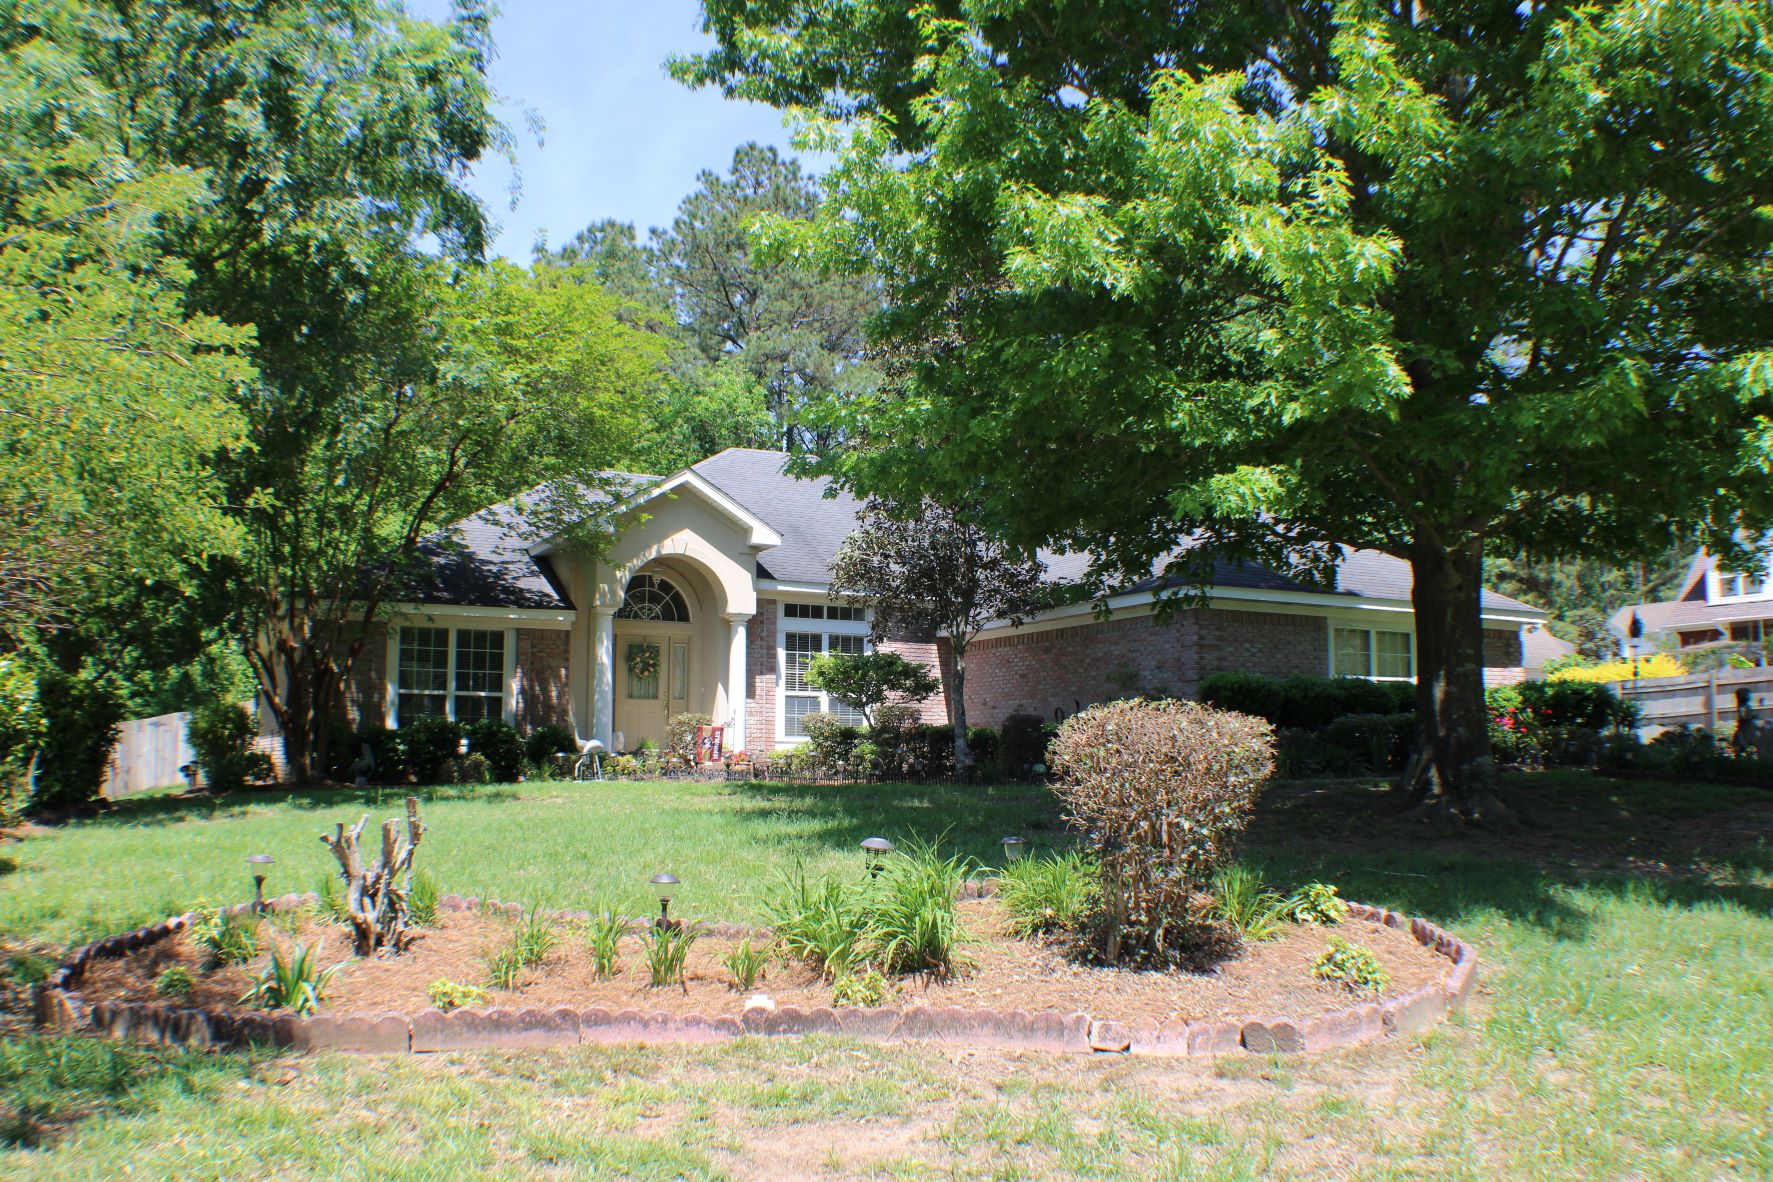 House on hill in Piney Z Tallahassee Florida